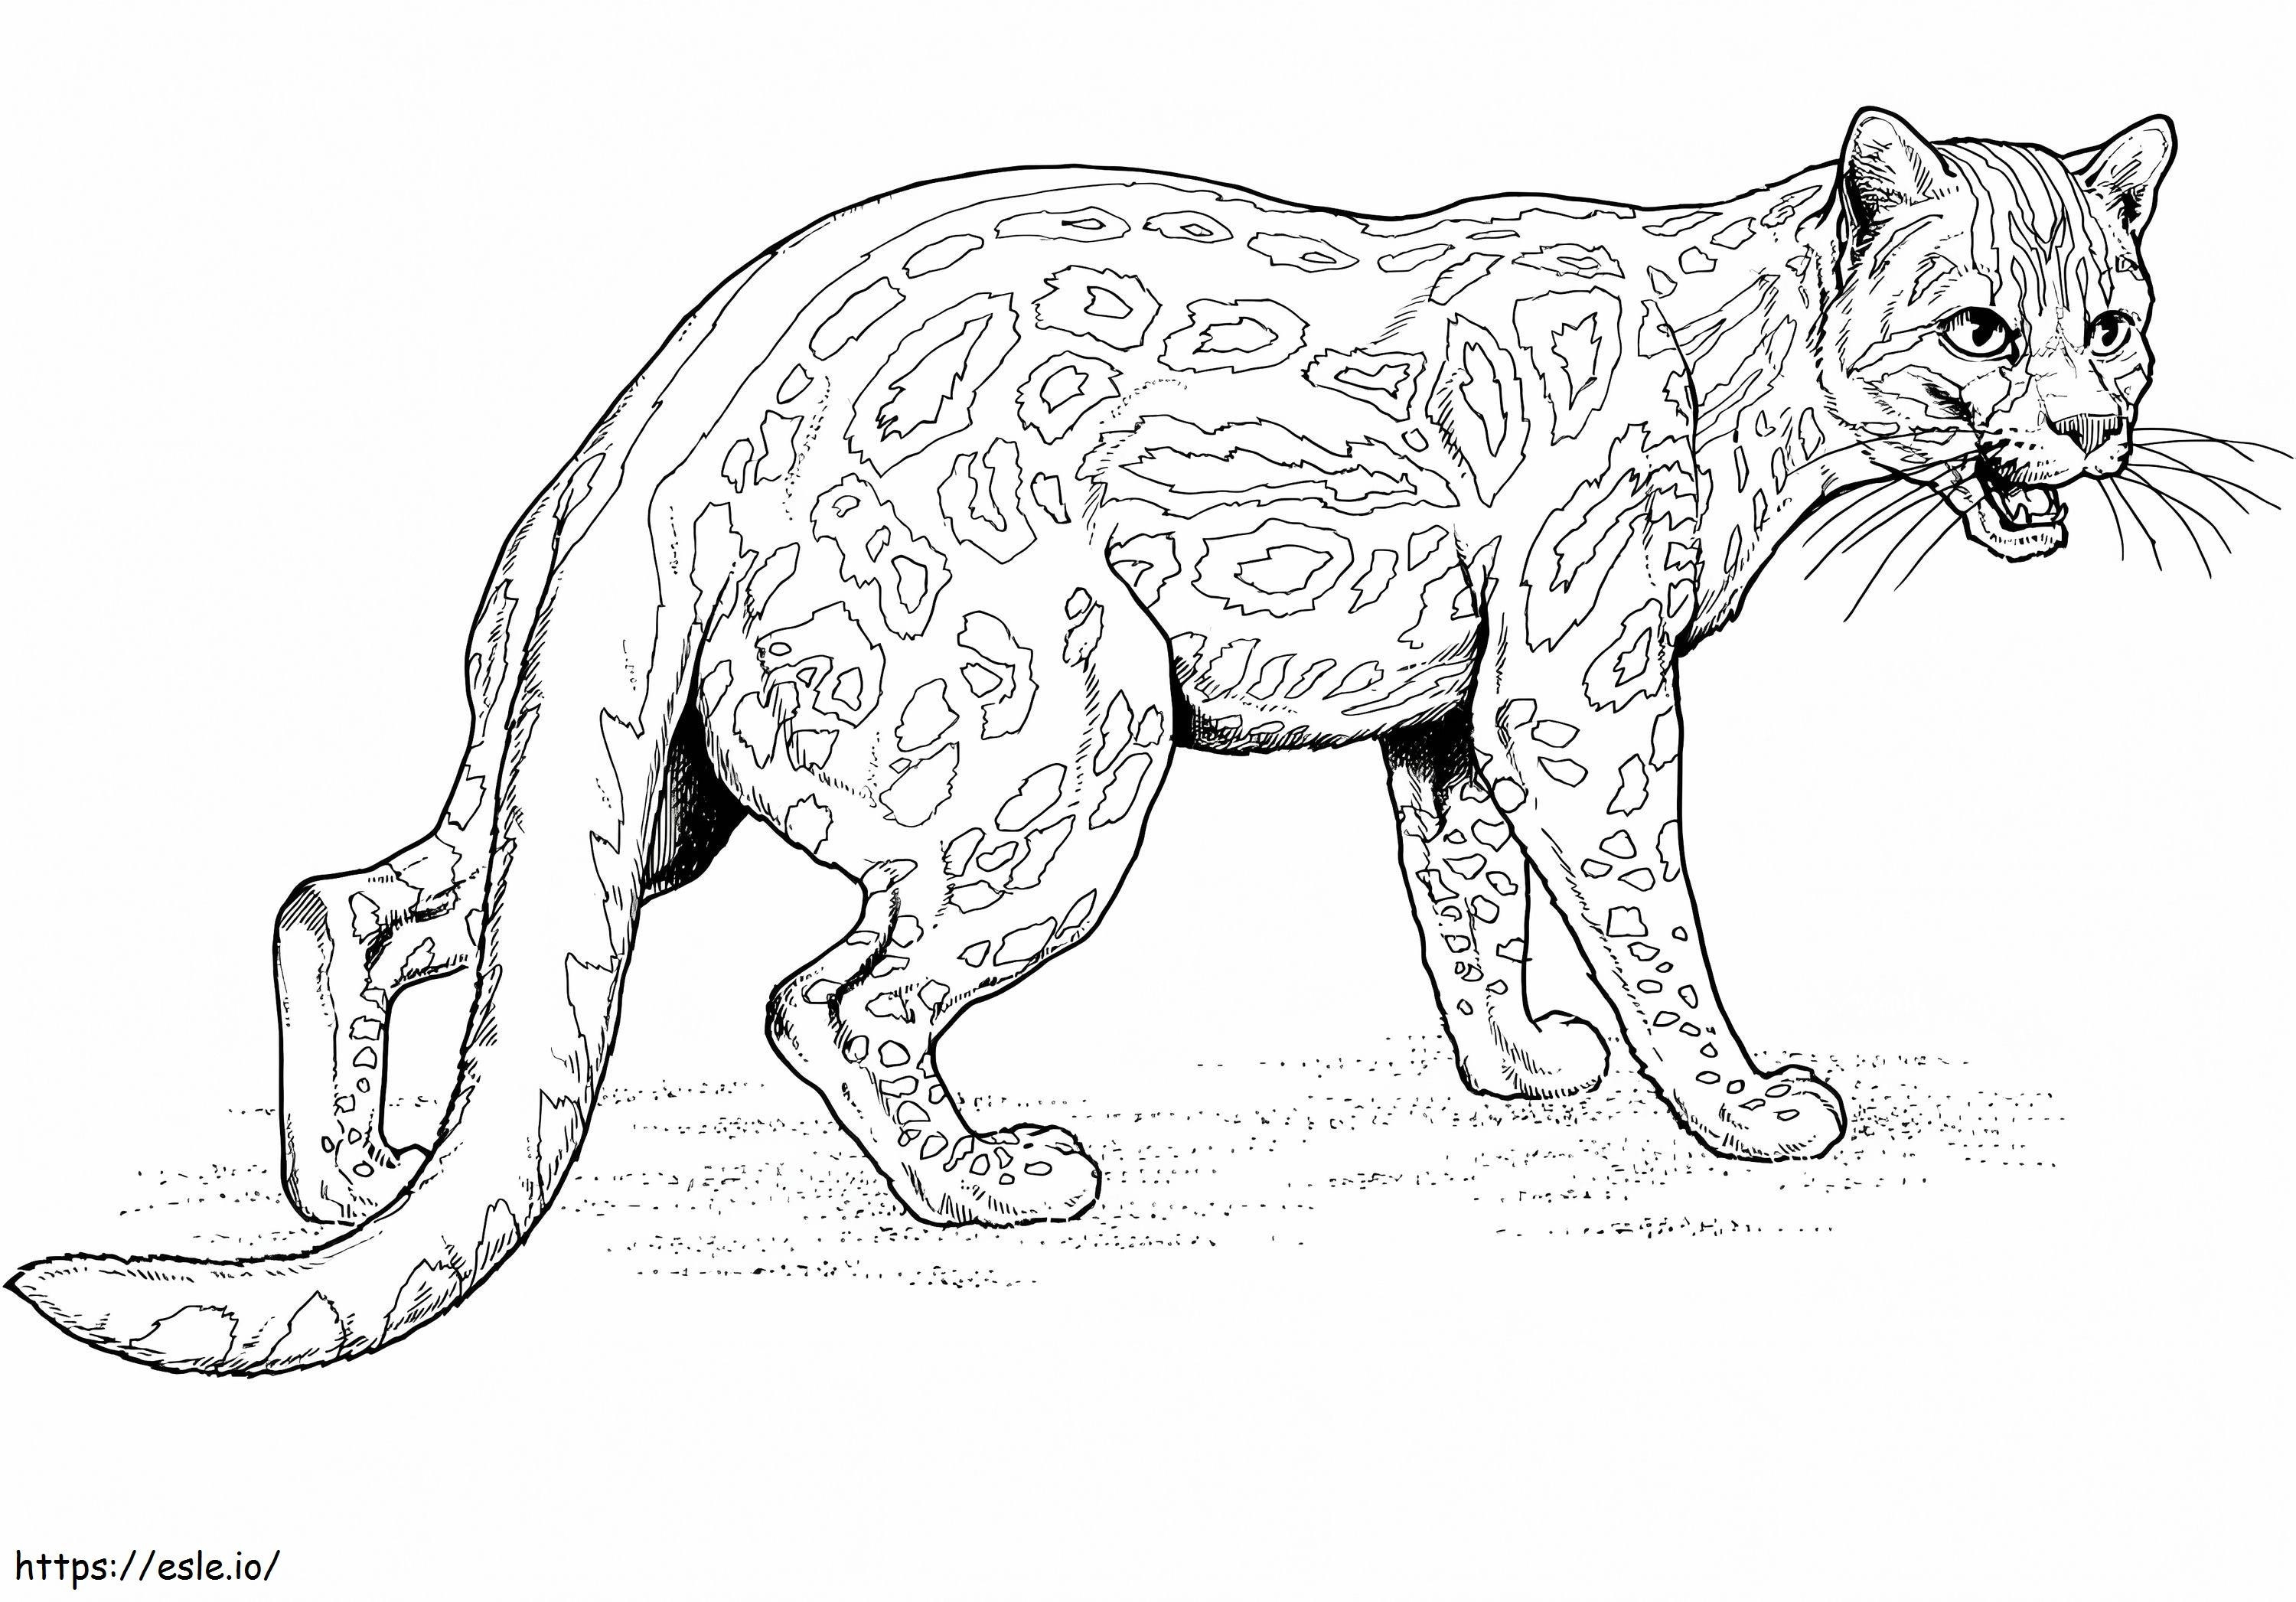 Angry Ocelot coloring page